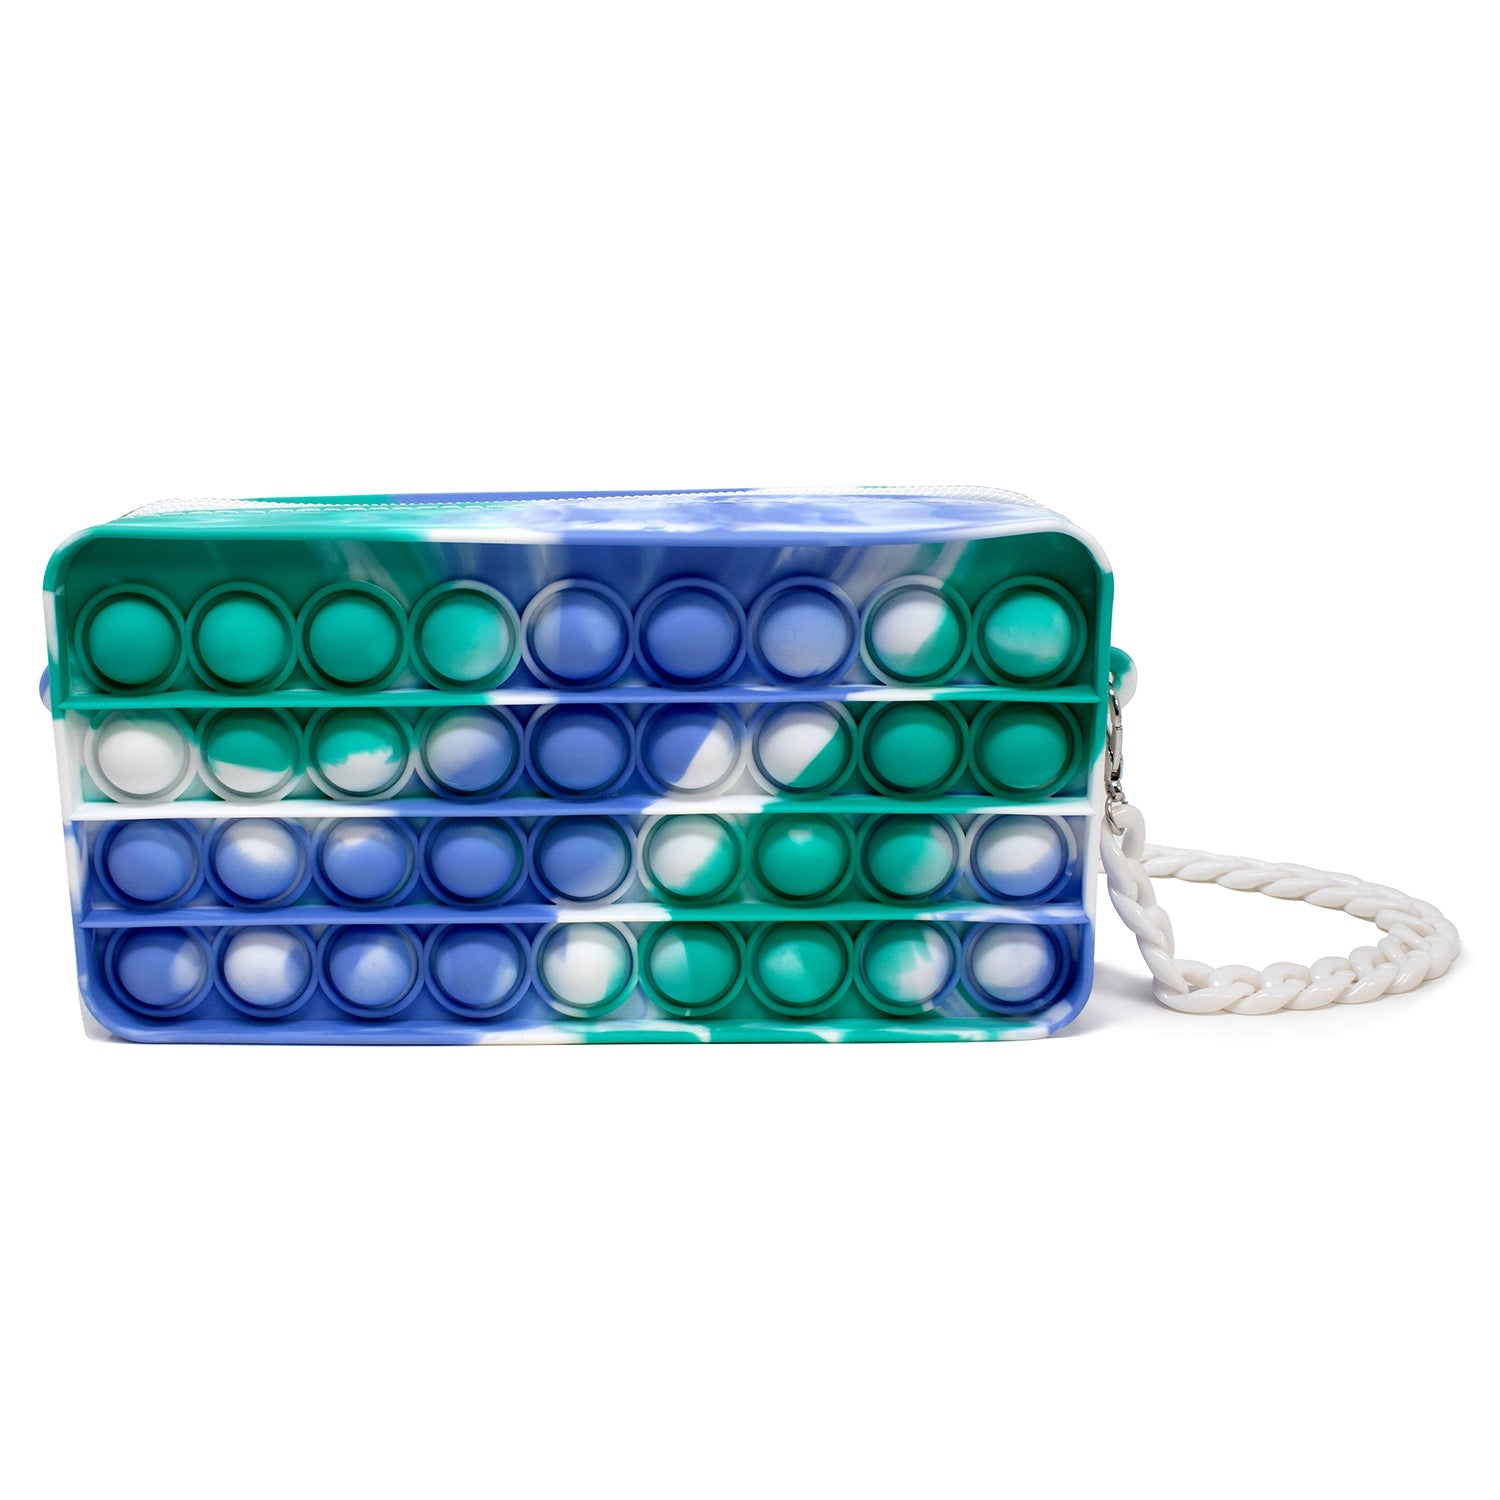 Bubble Pop Rectangular Purses are a great sensory fidget toy as well as a purse you can take anywhere. Easy to carry, fun to pop. Relieve your anxiety by pressing these soft silicone bubbles, over and over if you like. 3 different colorful pattern designs, each with hard plastic chain link strap.  Made of high-quality silicone material, with a Safe Zipper. Suitable for kids and adults, and helpful for those with ADHD, autism or anxiety issues. A great bubble pop mini fidget toy!